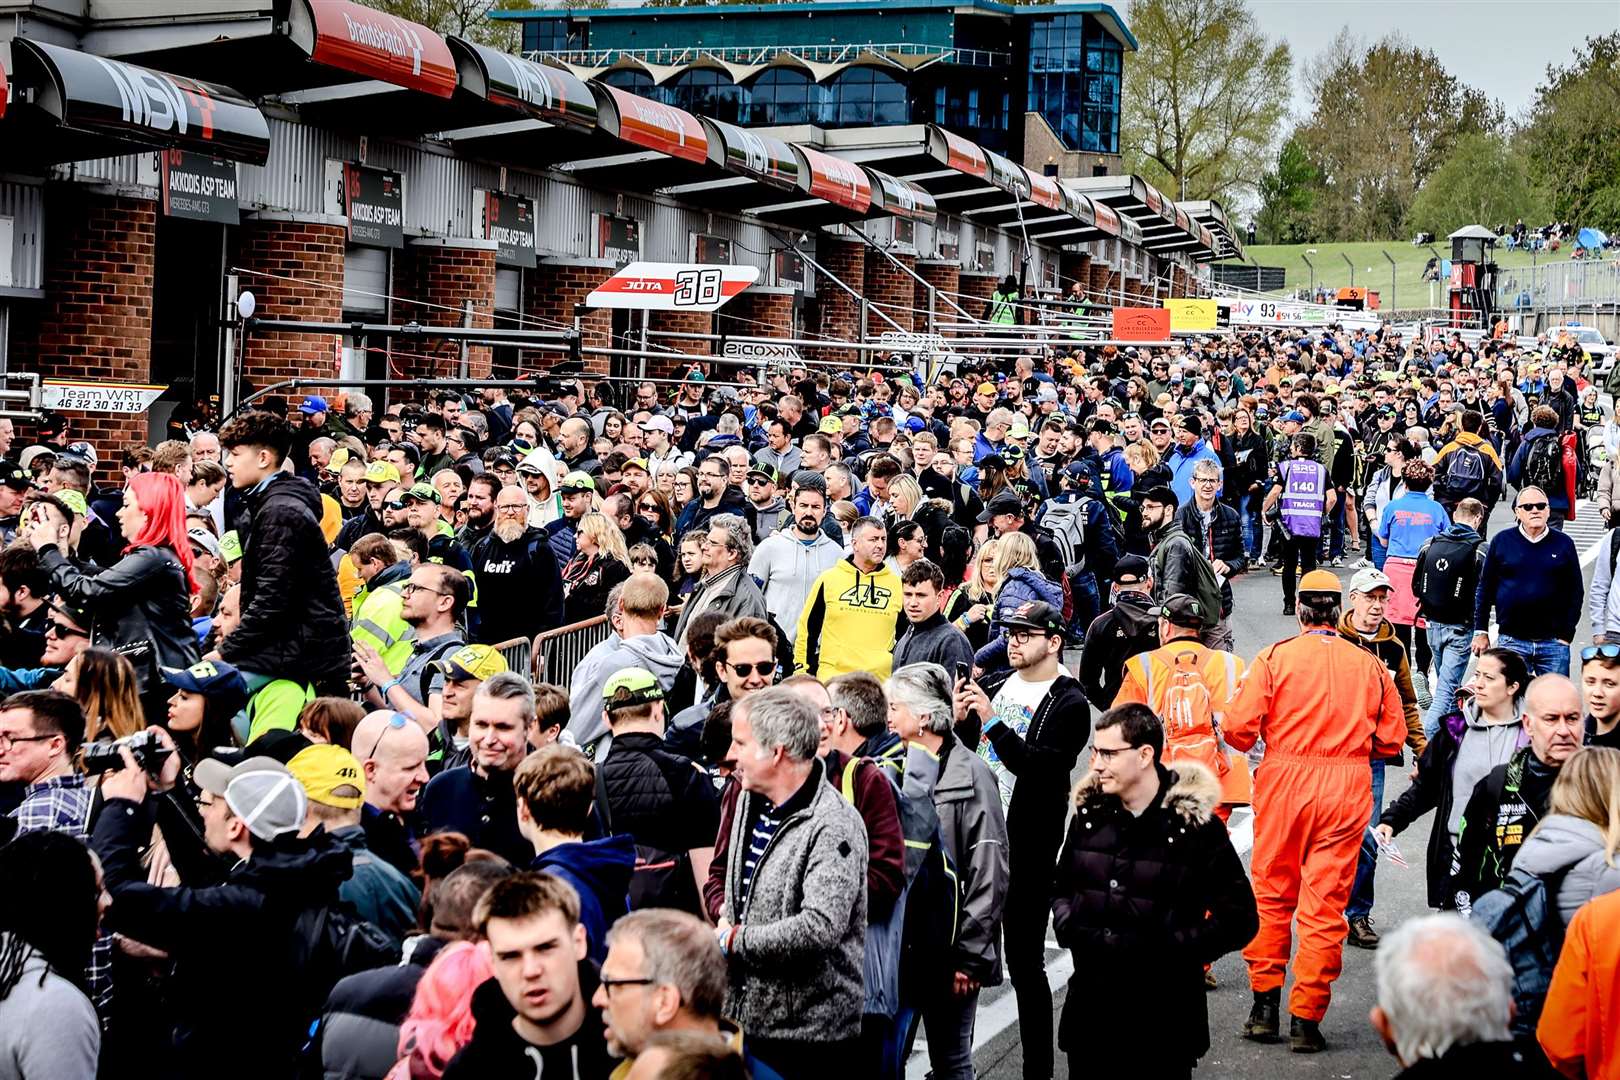 The pitlane walkabout was packed on Sunday